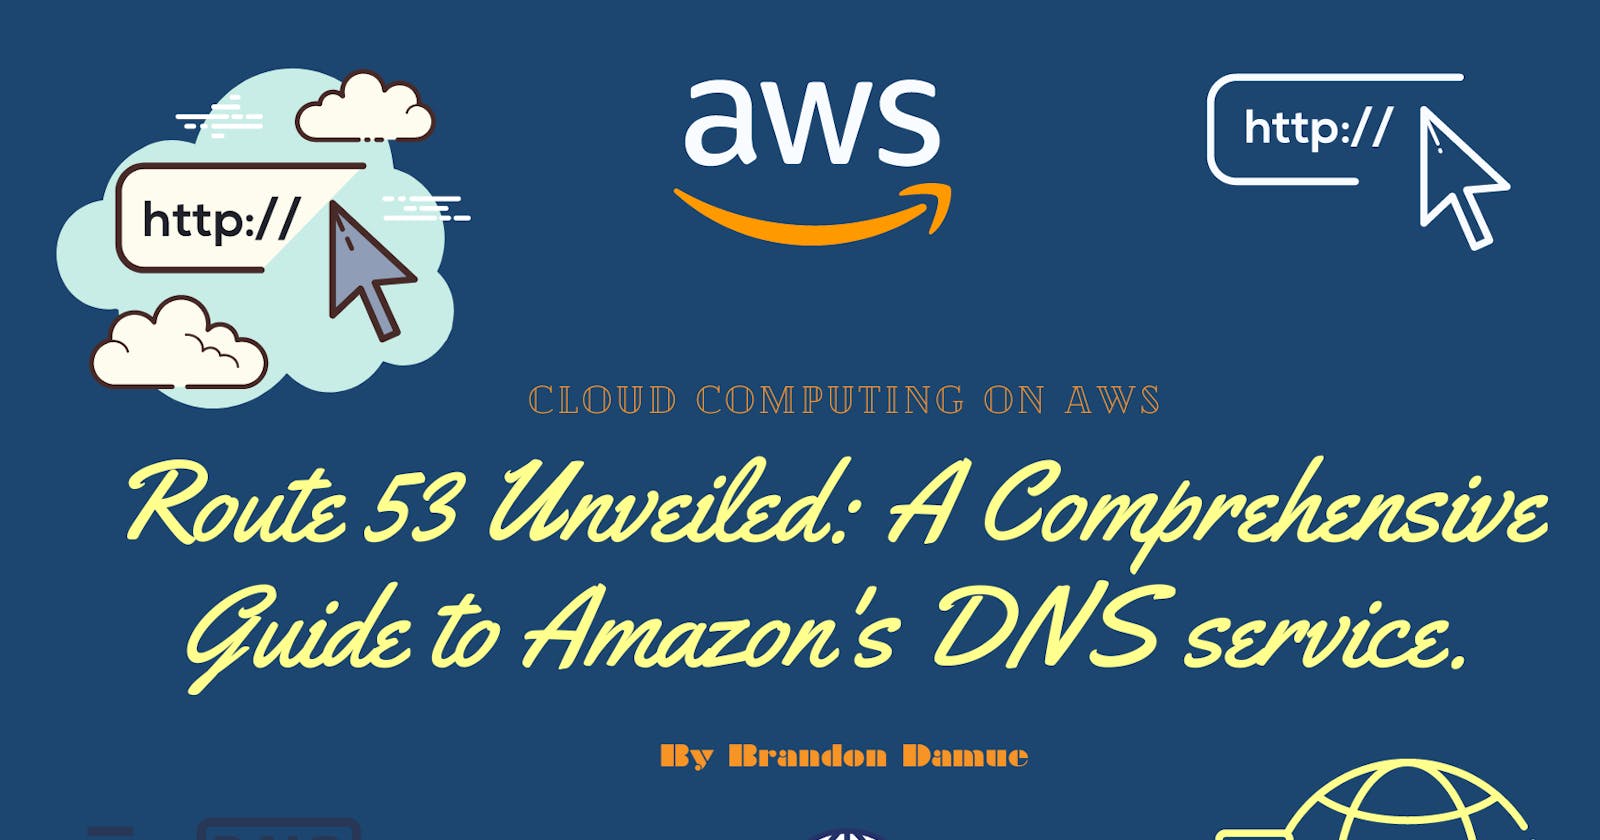 Route 53 Unveiled: A Comprehensive Guide to Amazon's DNS service.